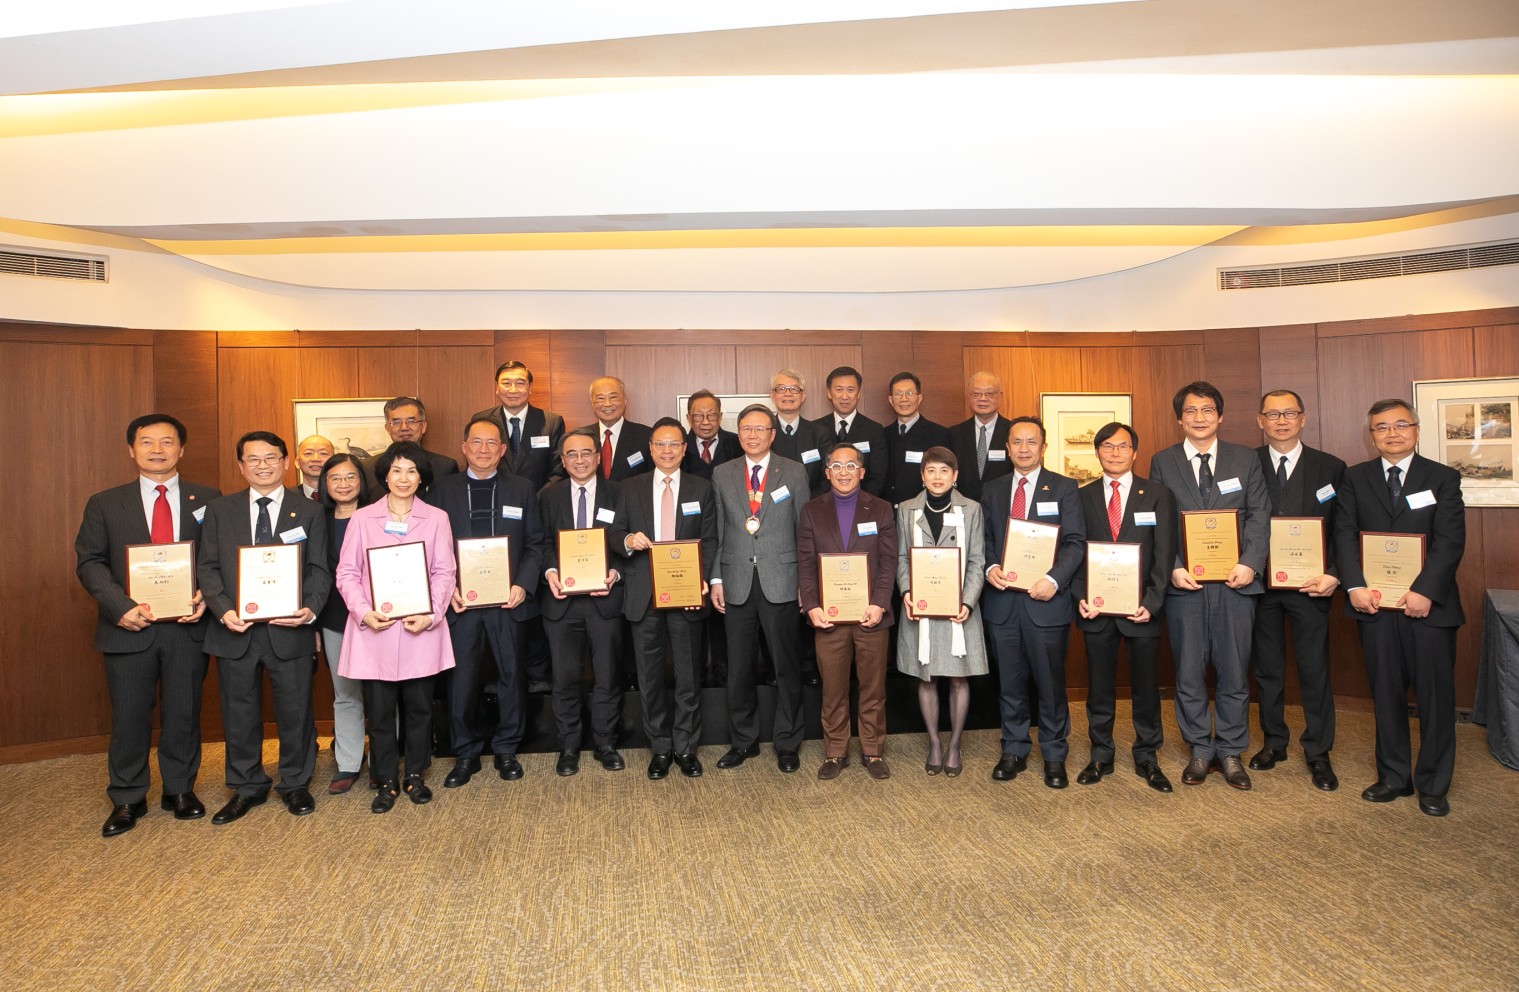 Prof S. Joe Qin (front row, first from left) and Prof Sam Kwong Tak-wu (front row, fourth from right) are among the 13 newly elected HKAES Fellows esteemed for their outstanding expertise and significant contributions to science and engineering.